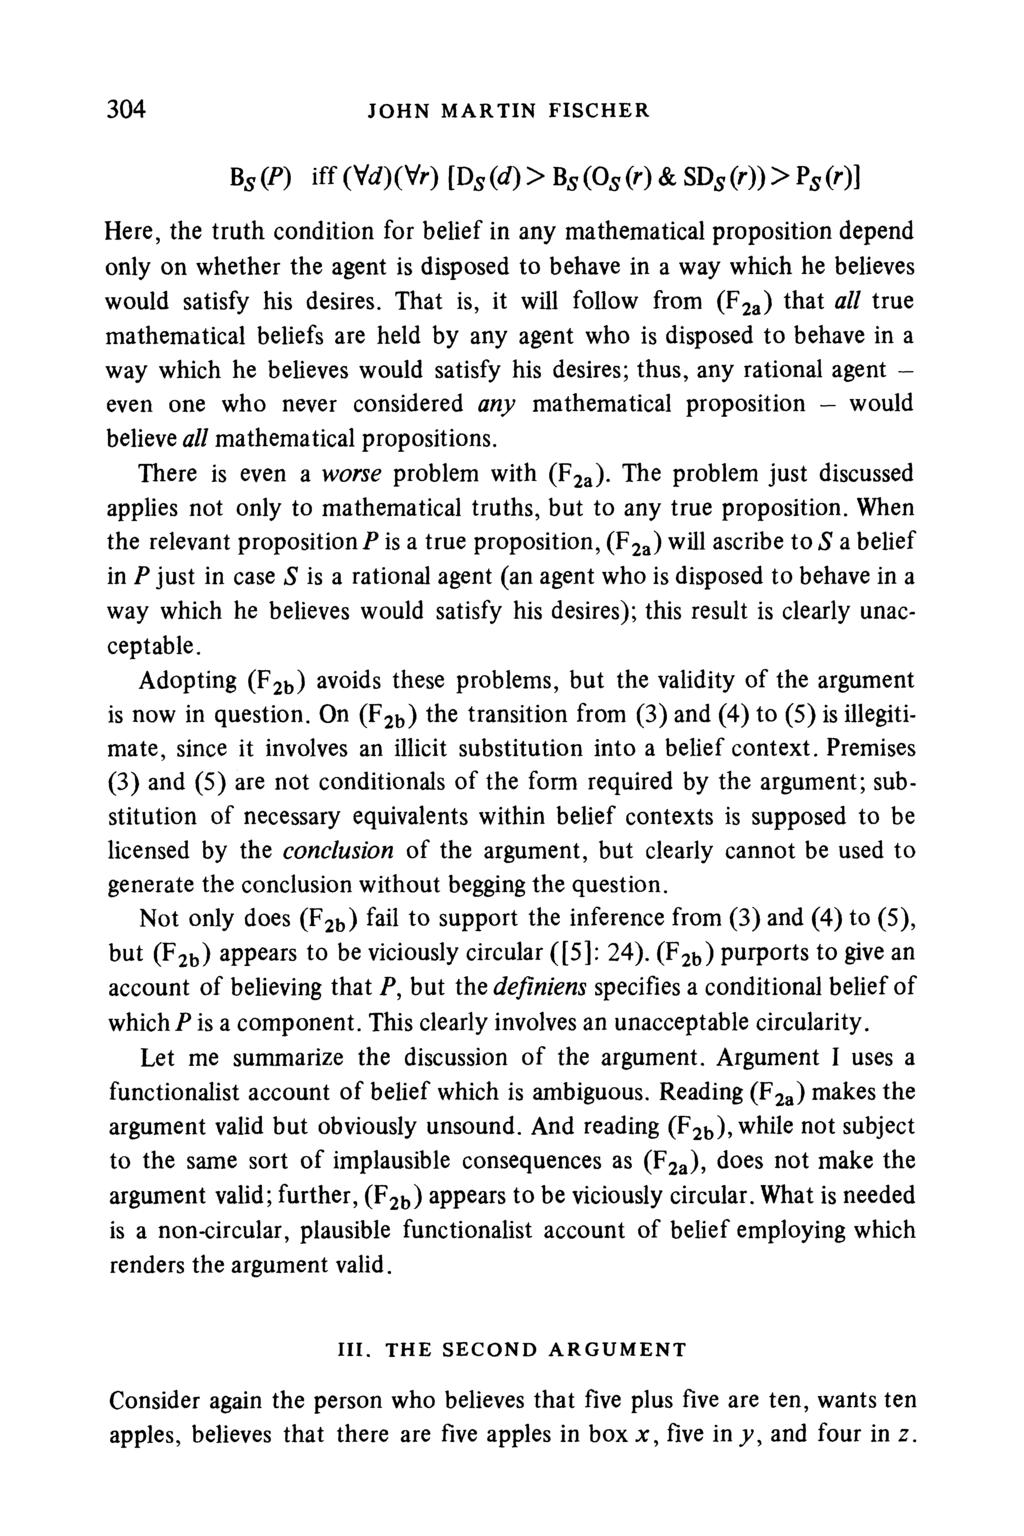 304 JOHN MARTIN FISCHER Bs (P) iff (Vd)(Vr) [Ds (d)> Bs (Os (r) & SDs (r))> Ps (r)] Here, the truth condition for belief in any mathematical proposition depend only on whether the agent is disposed